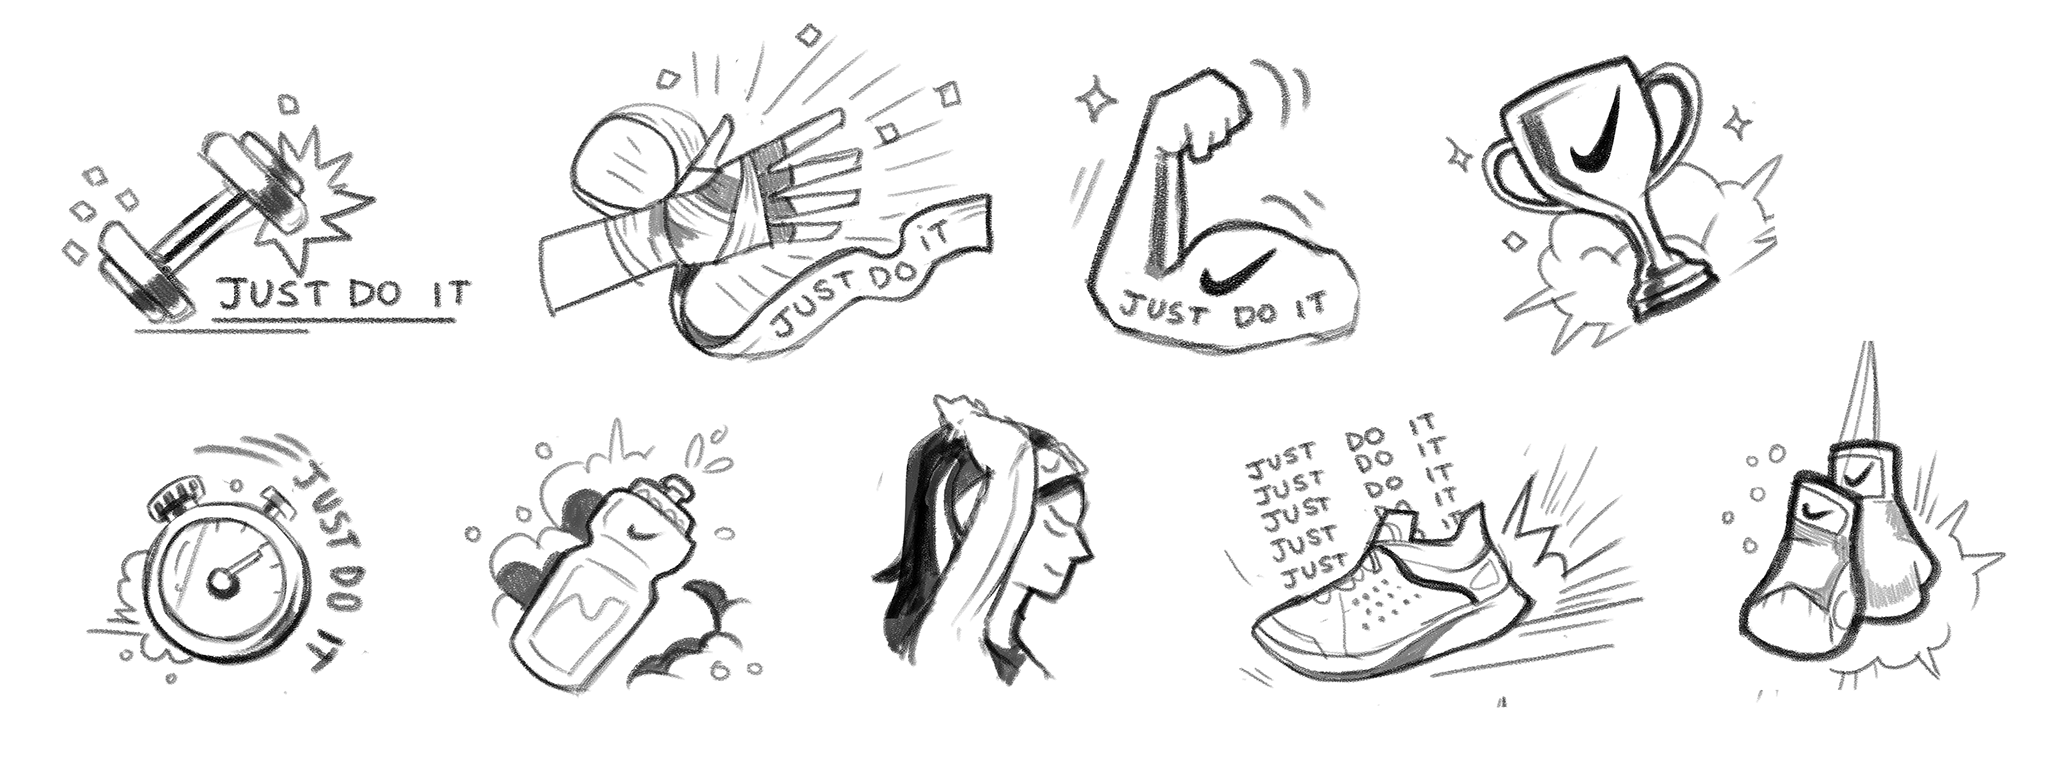 nike_stickers_2019.10.28.png